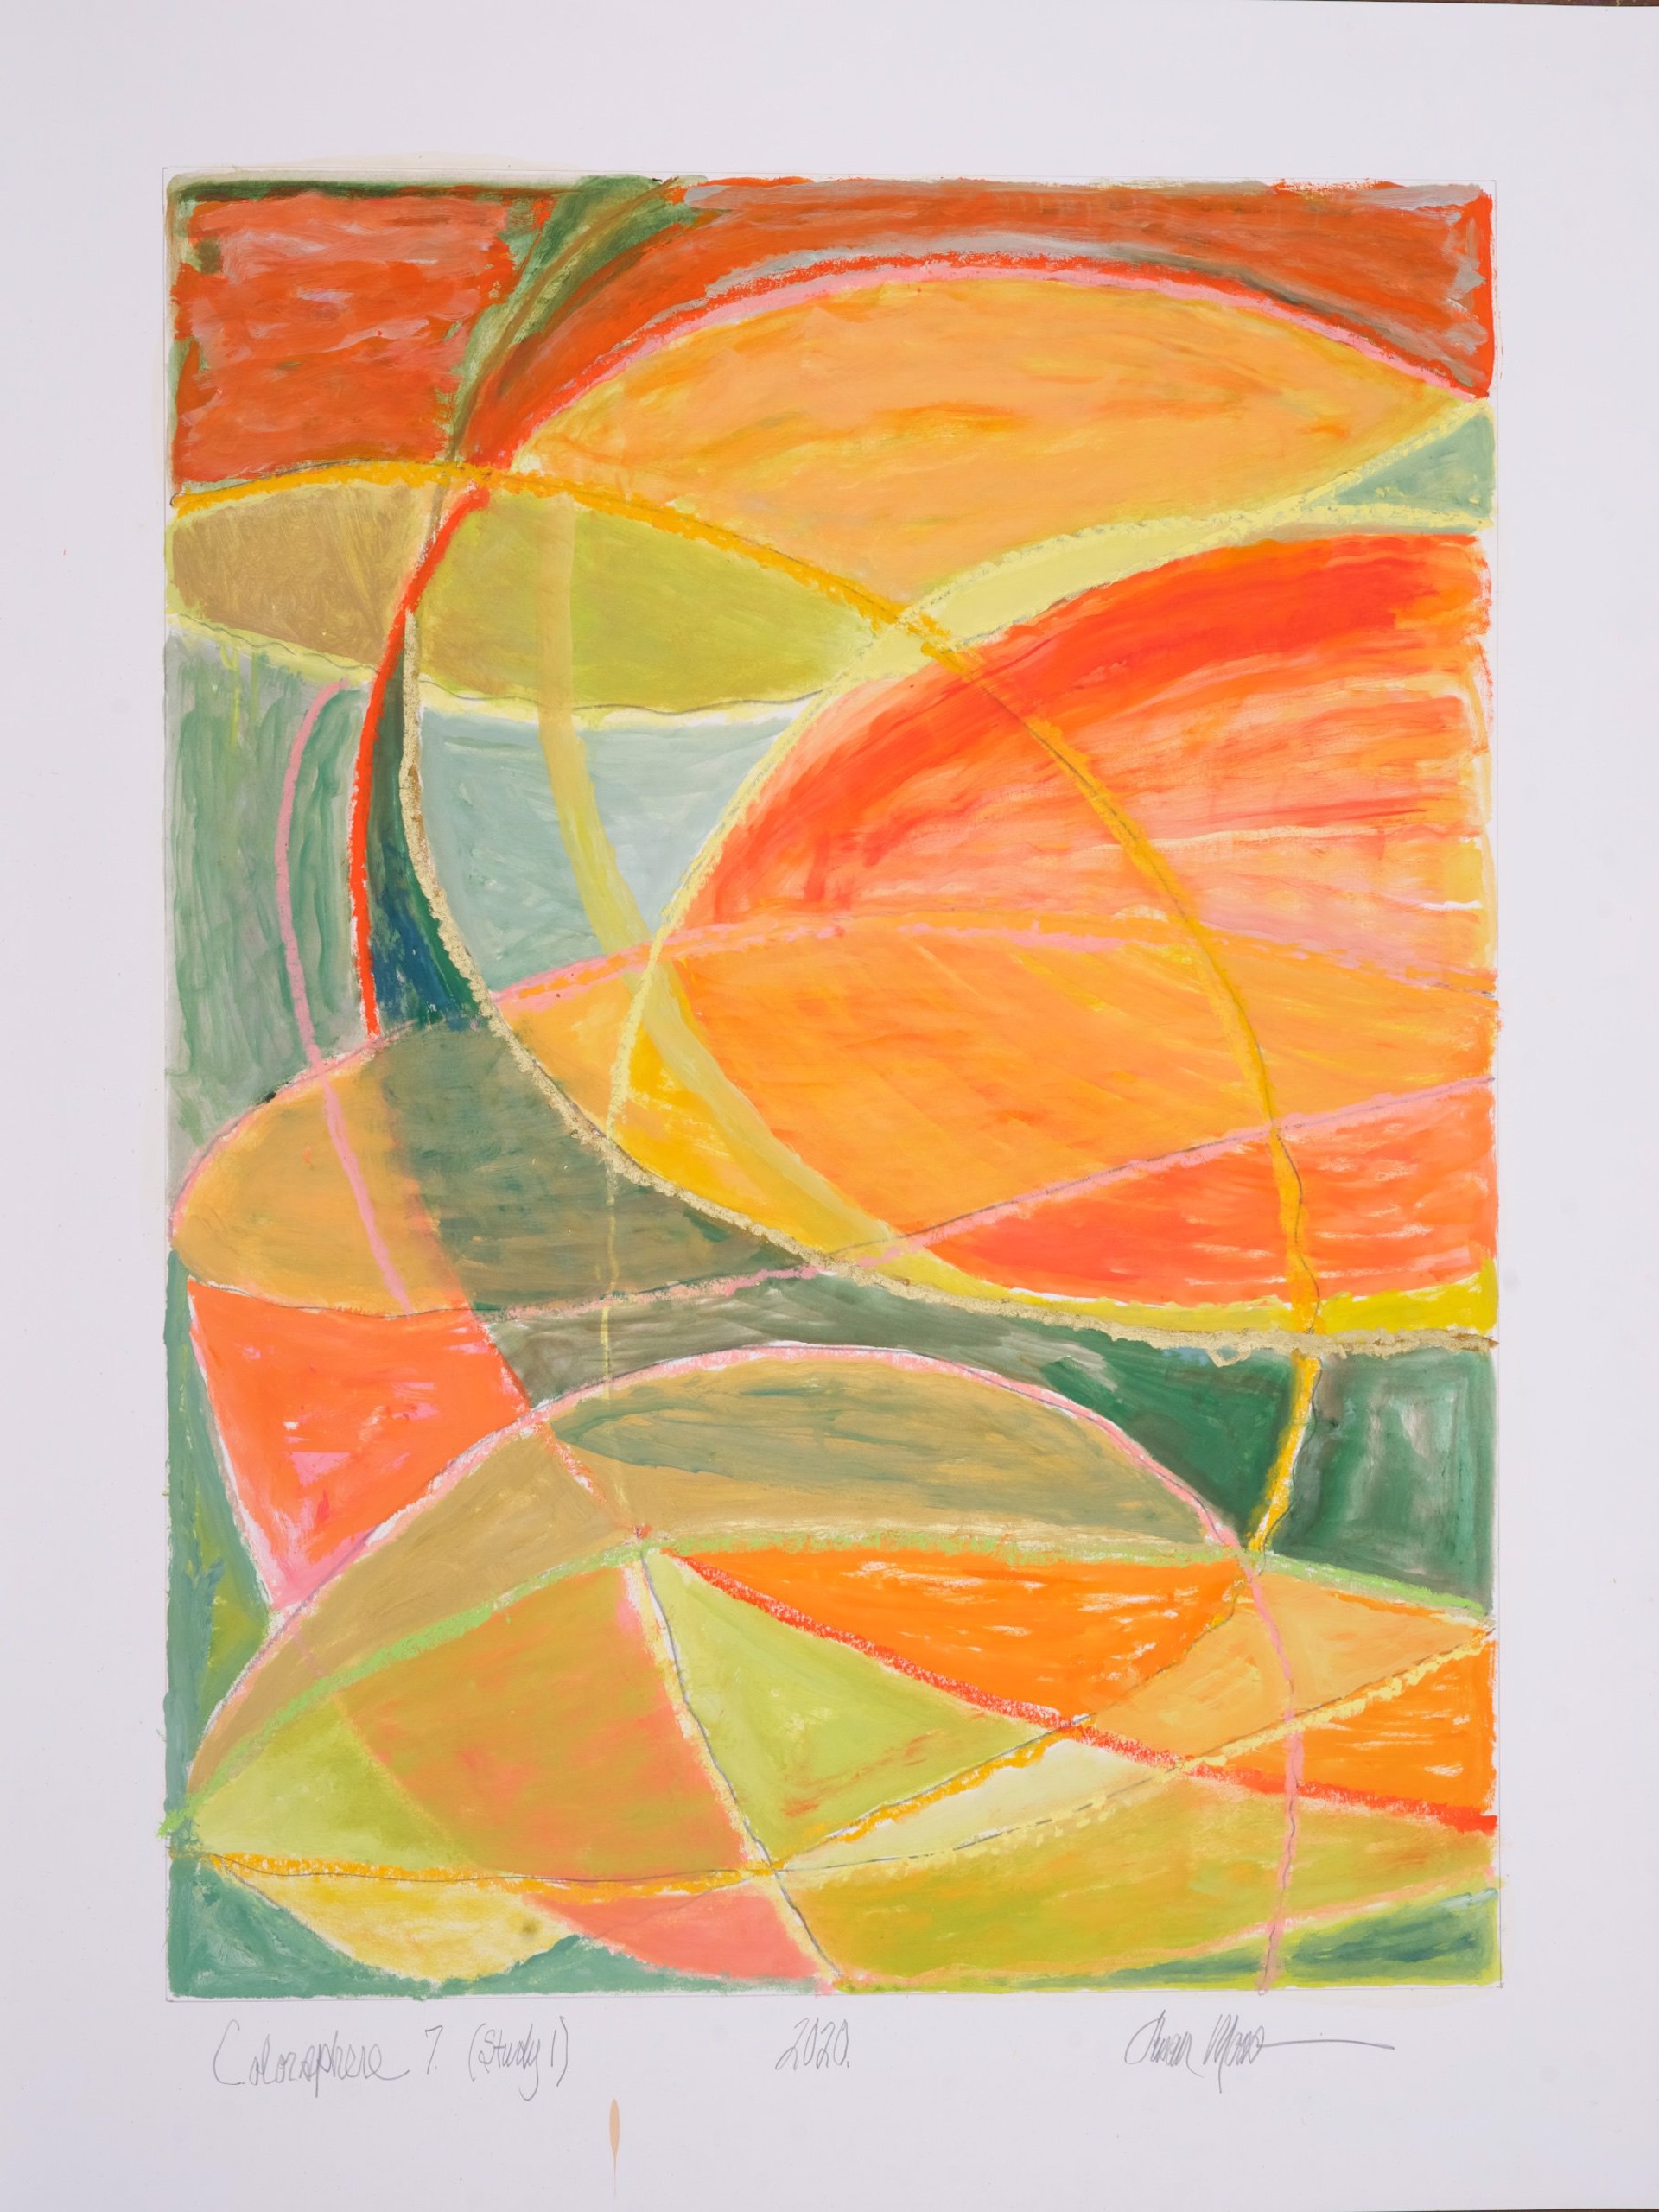 Colorsphere 7 (Study 1) by Susan Moss